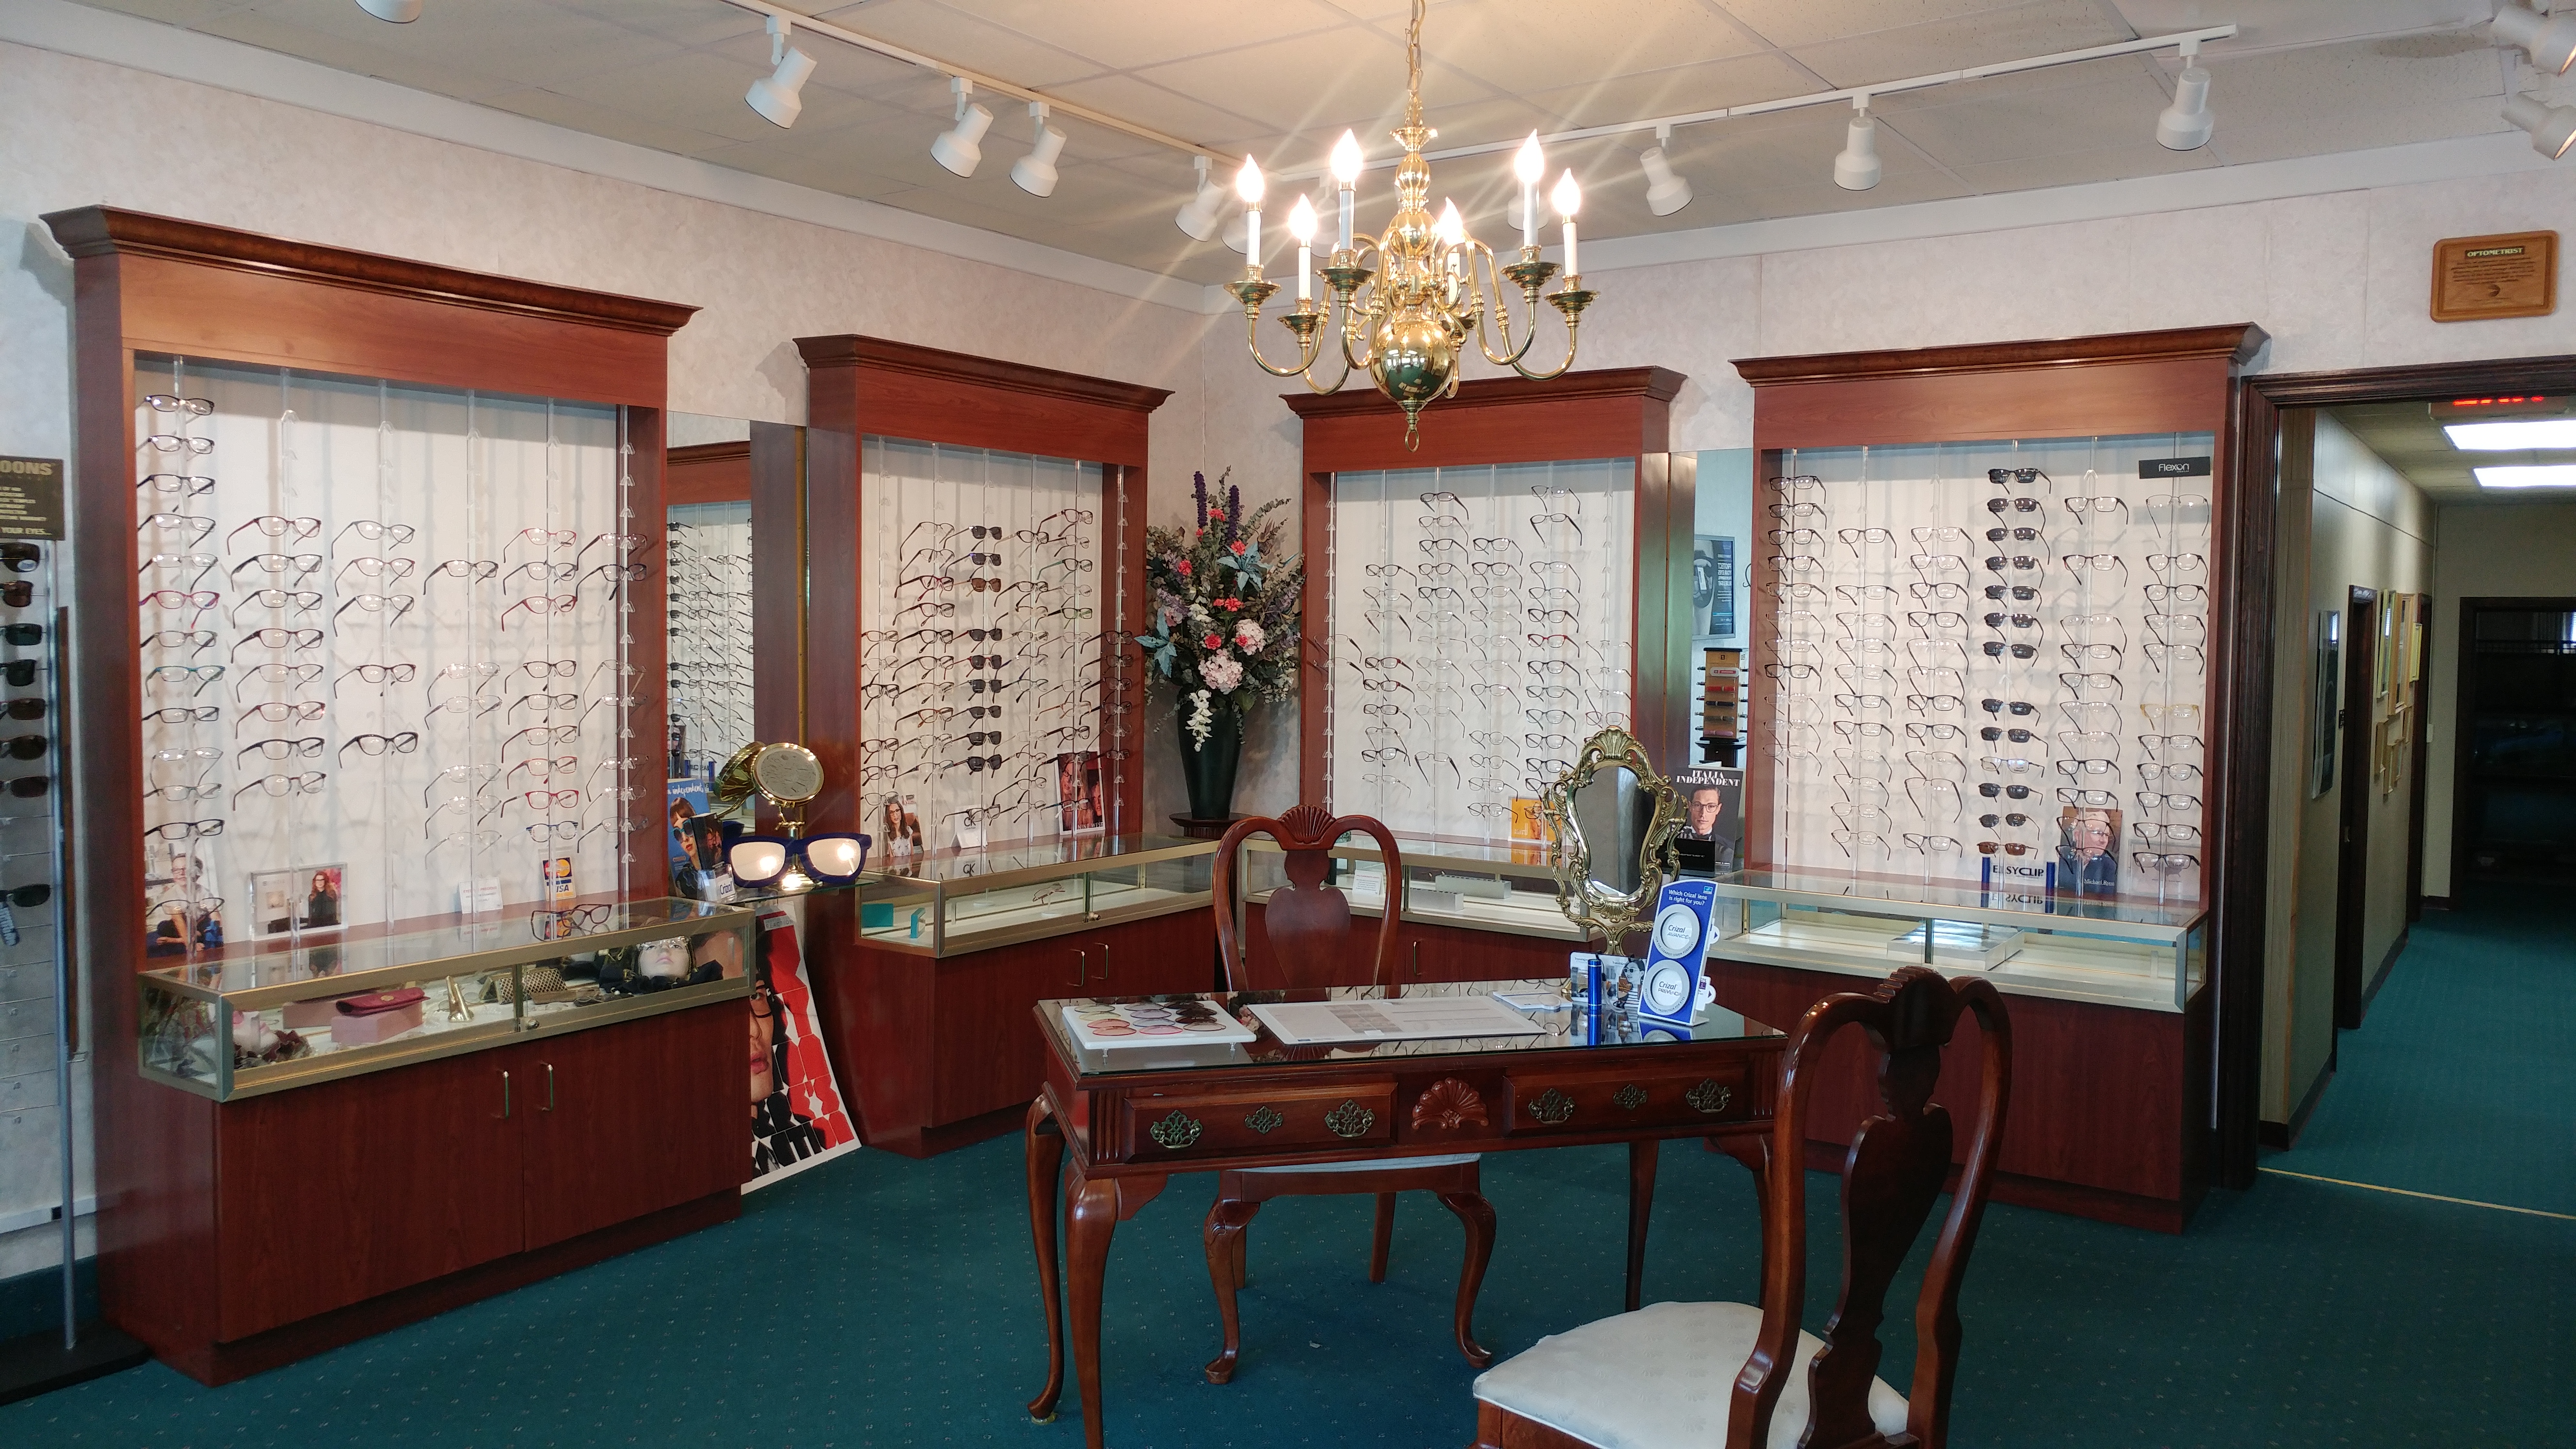 Care Touch Eyewear Accessories in Vision Centers 